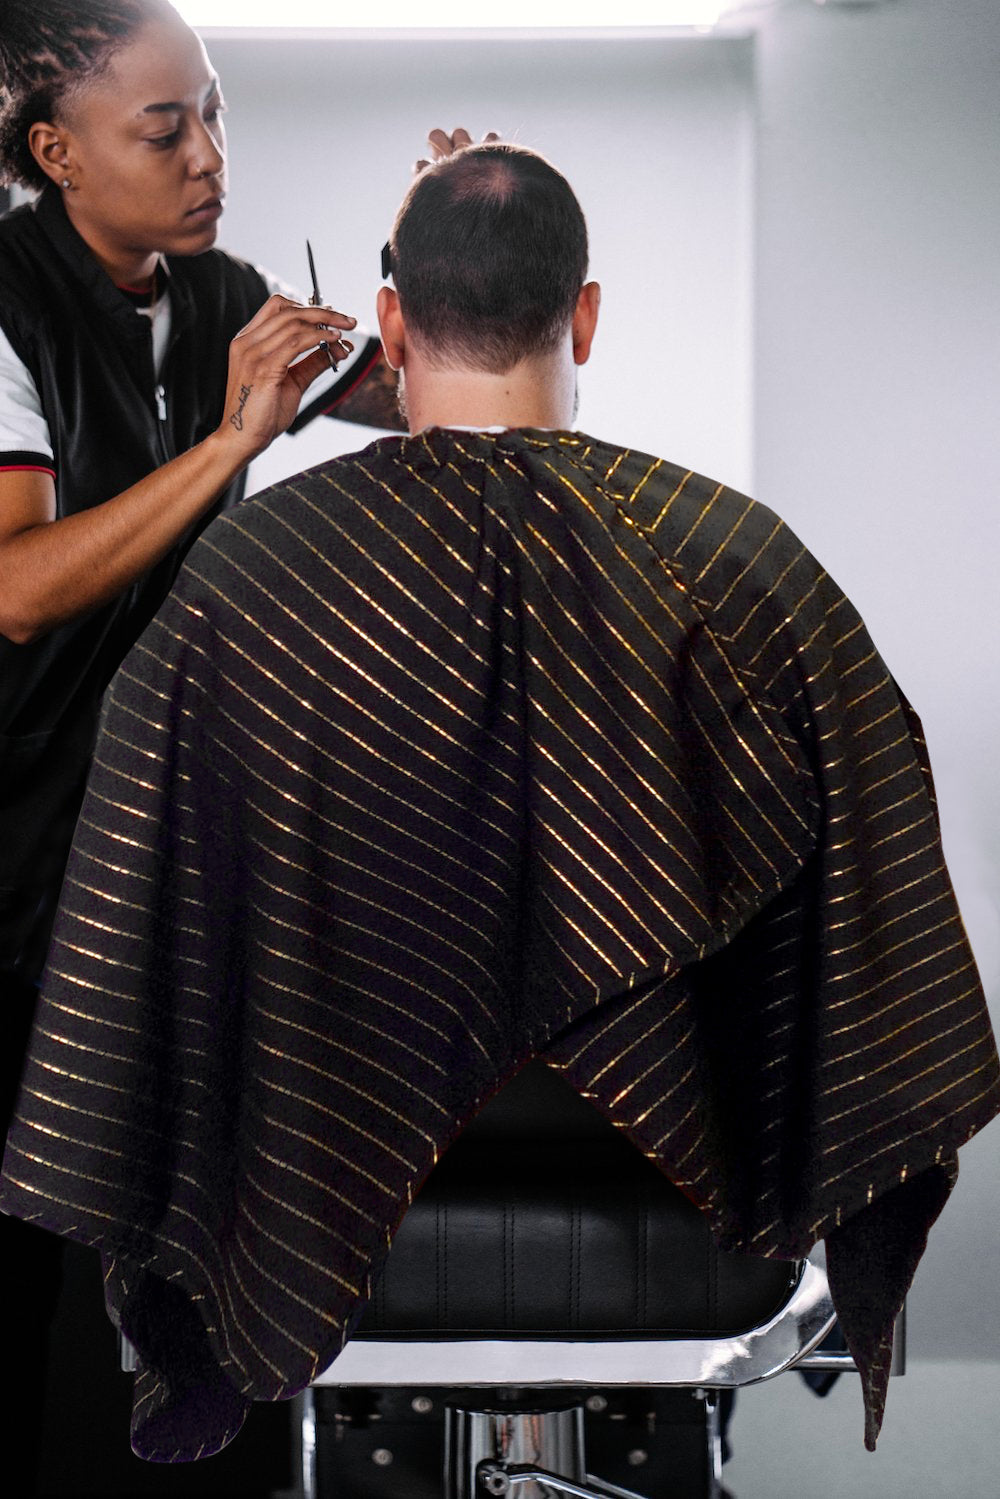 The Barber Cape - 24K Gold Collection